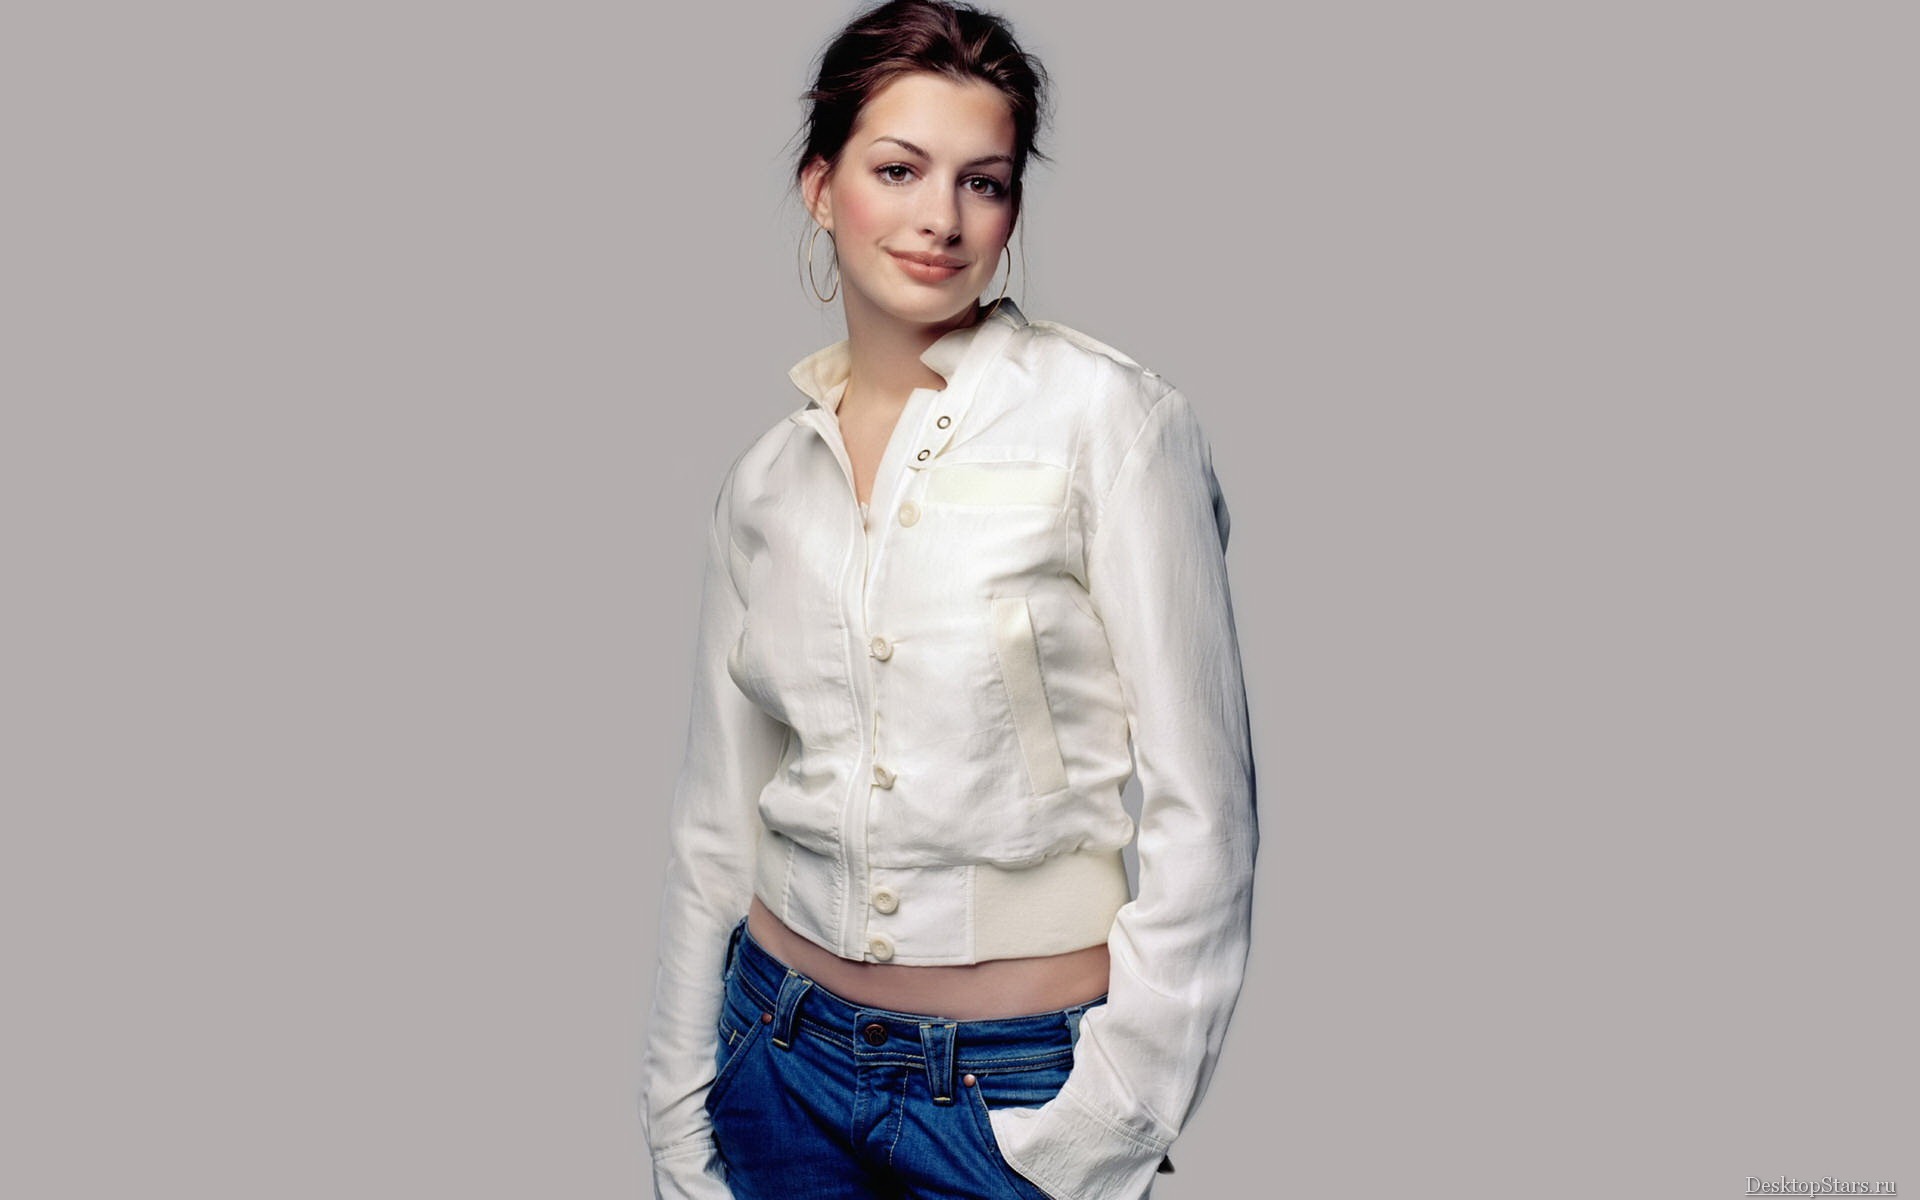 Anne Hathaway #015 - 1920x1200 Wallpapers Pictures Photos Images